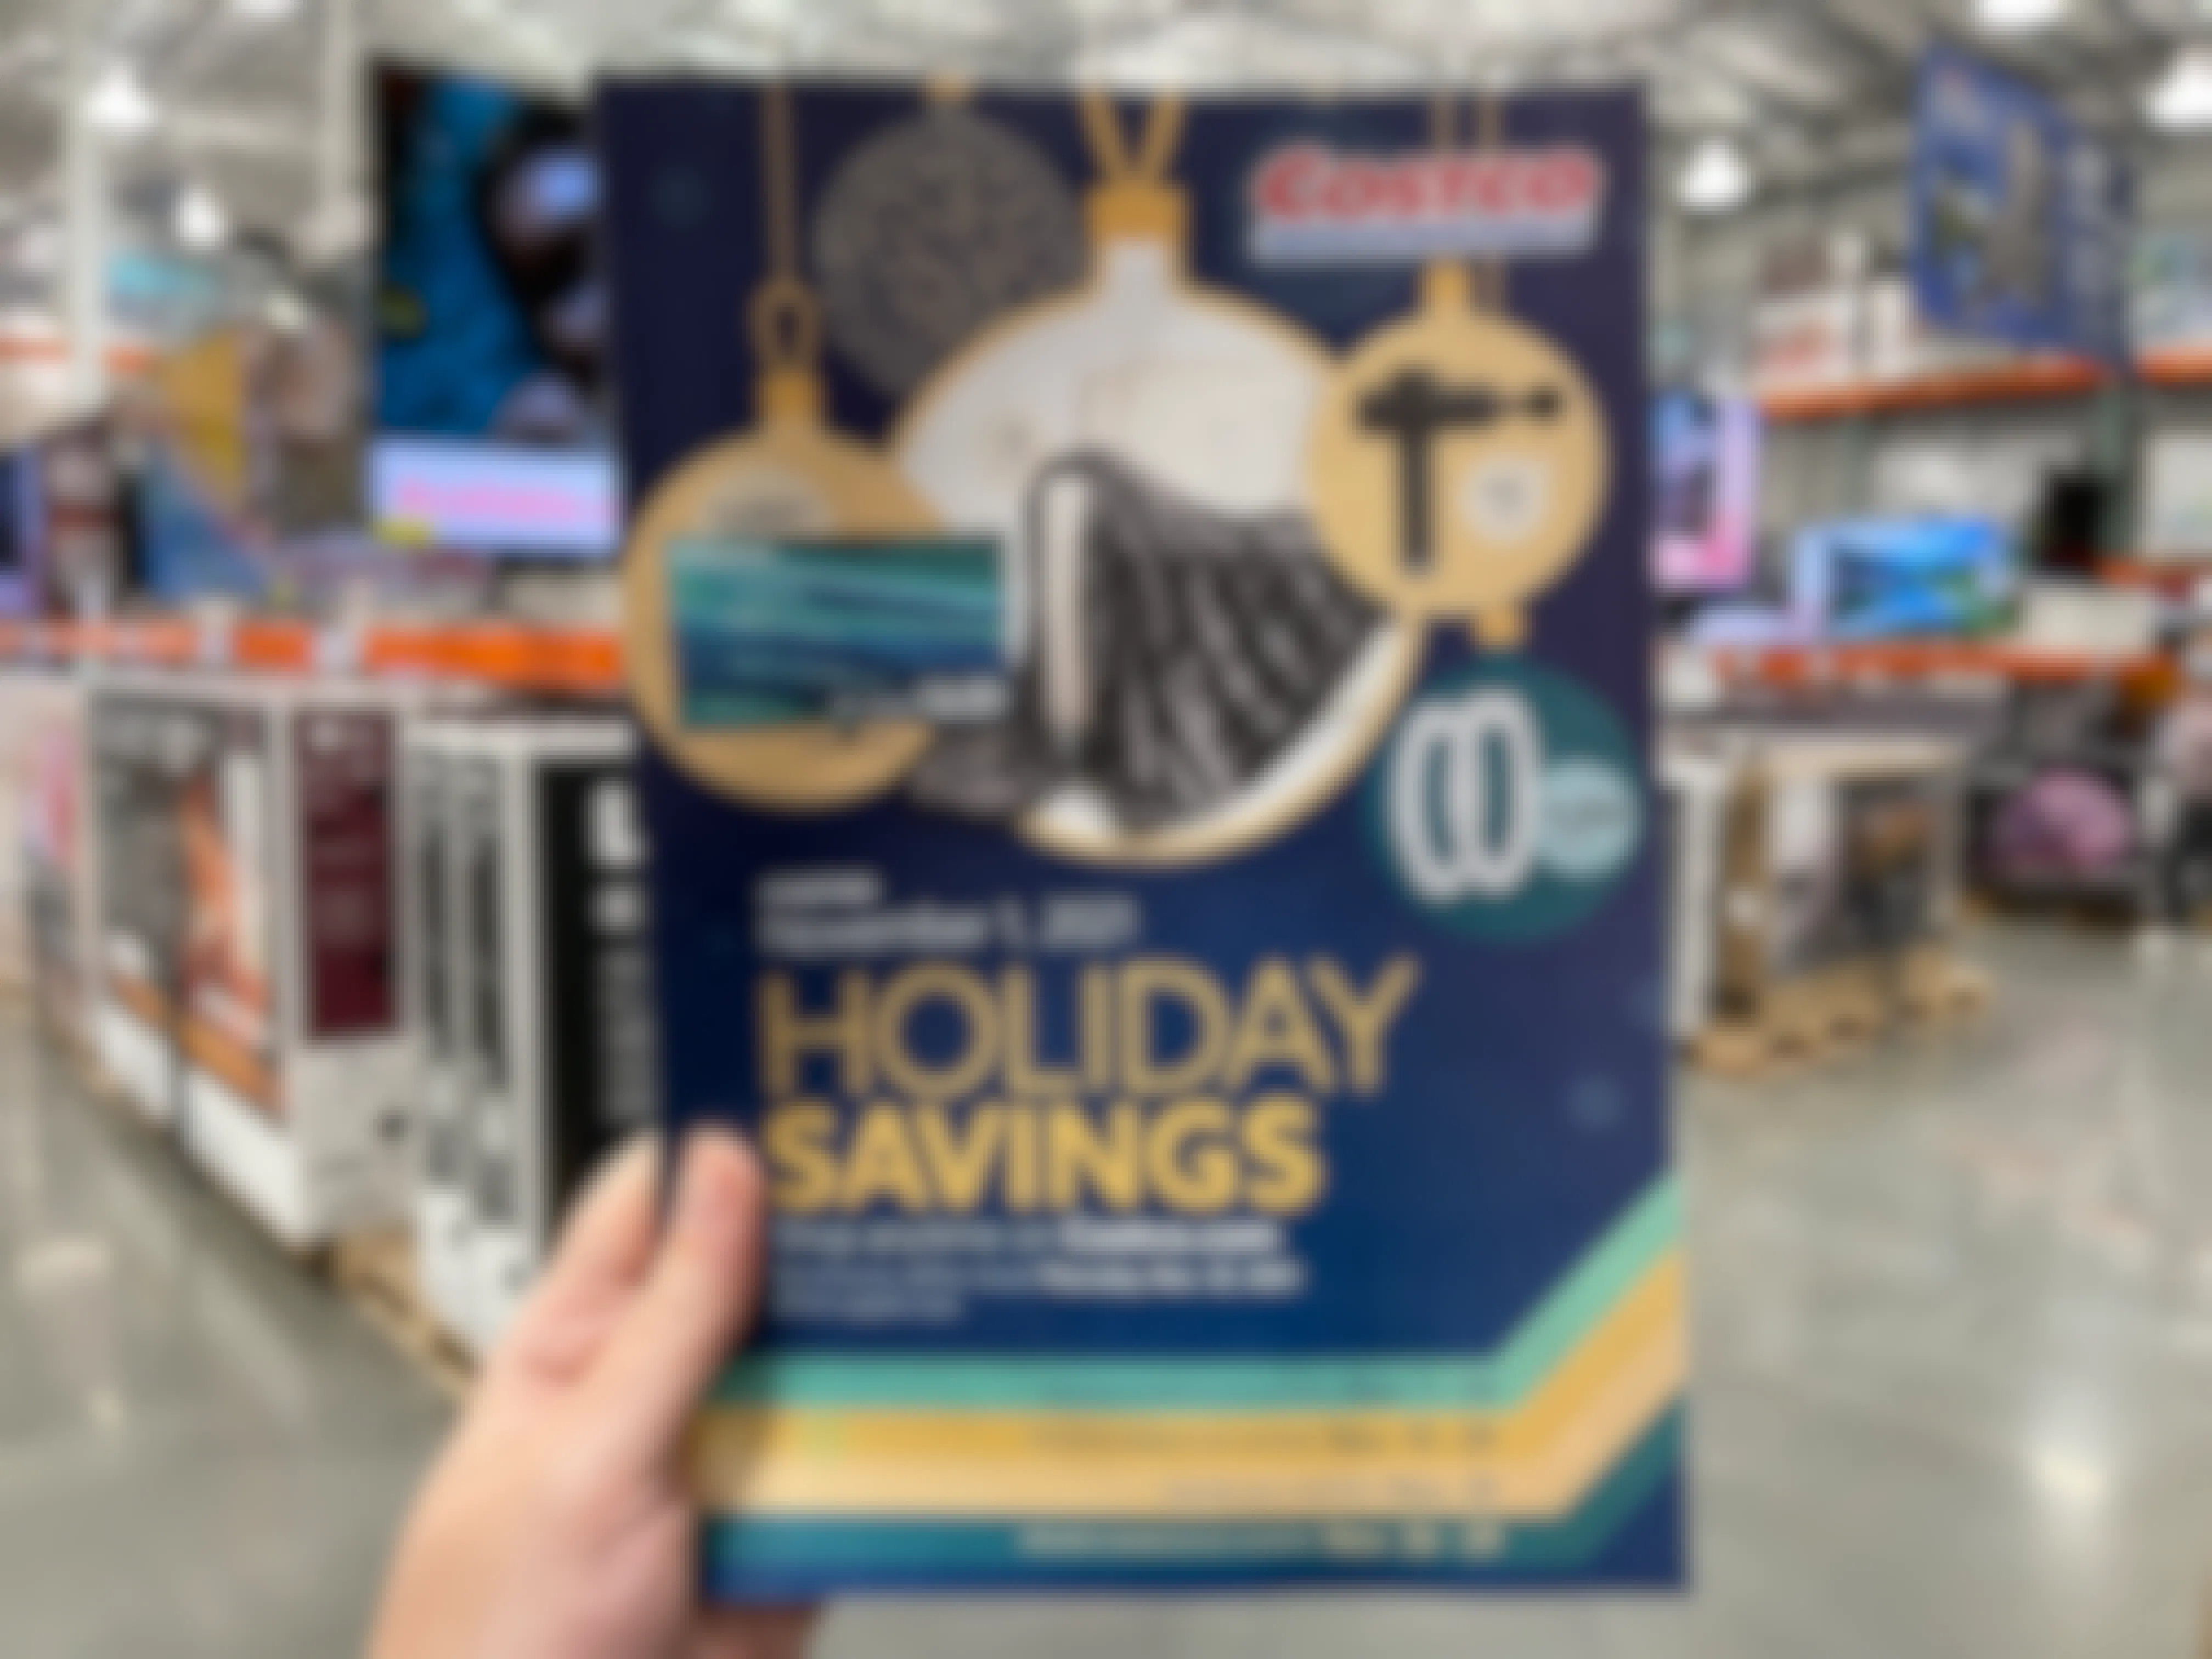 A 2021 holiday savings book for Costco held in the store.